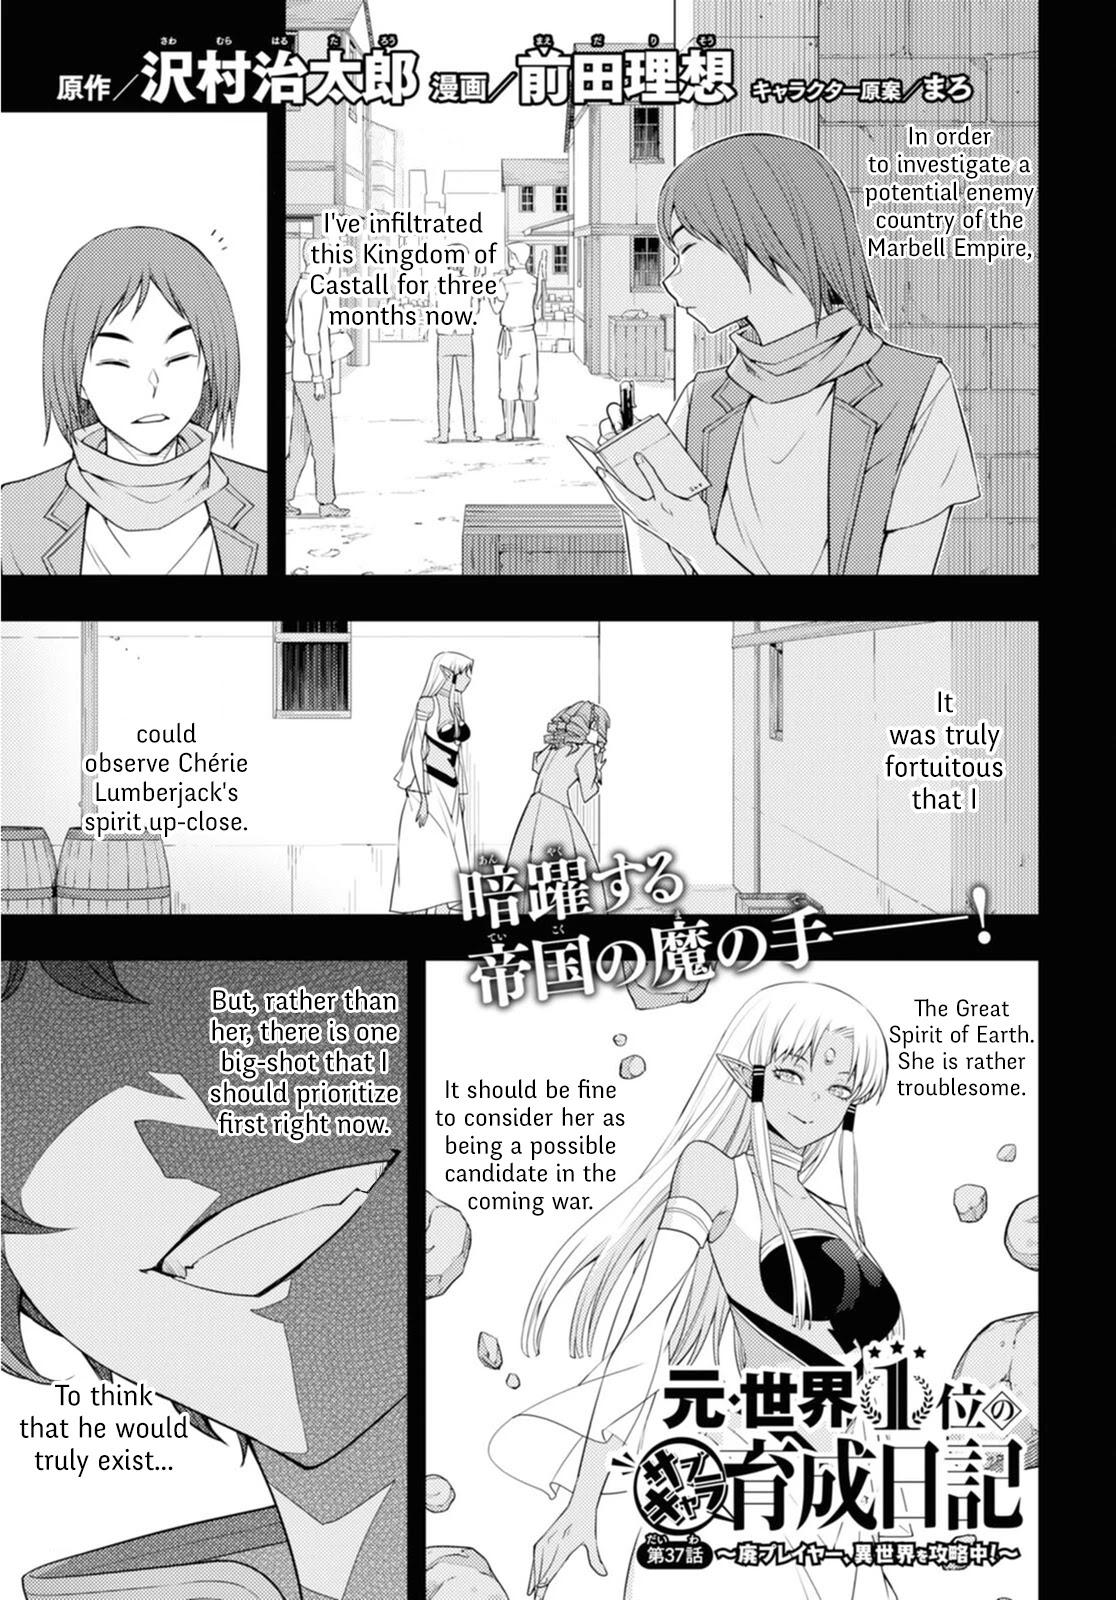 The Former Top 1's Sub-Character Training Diary ~A Dedicated Player Is Currently Conquering Another World!~ - Page 1